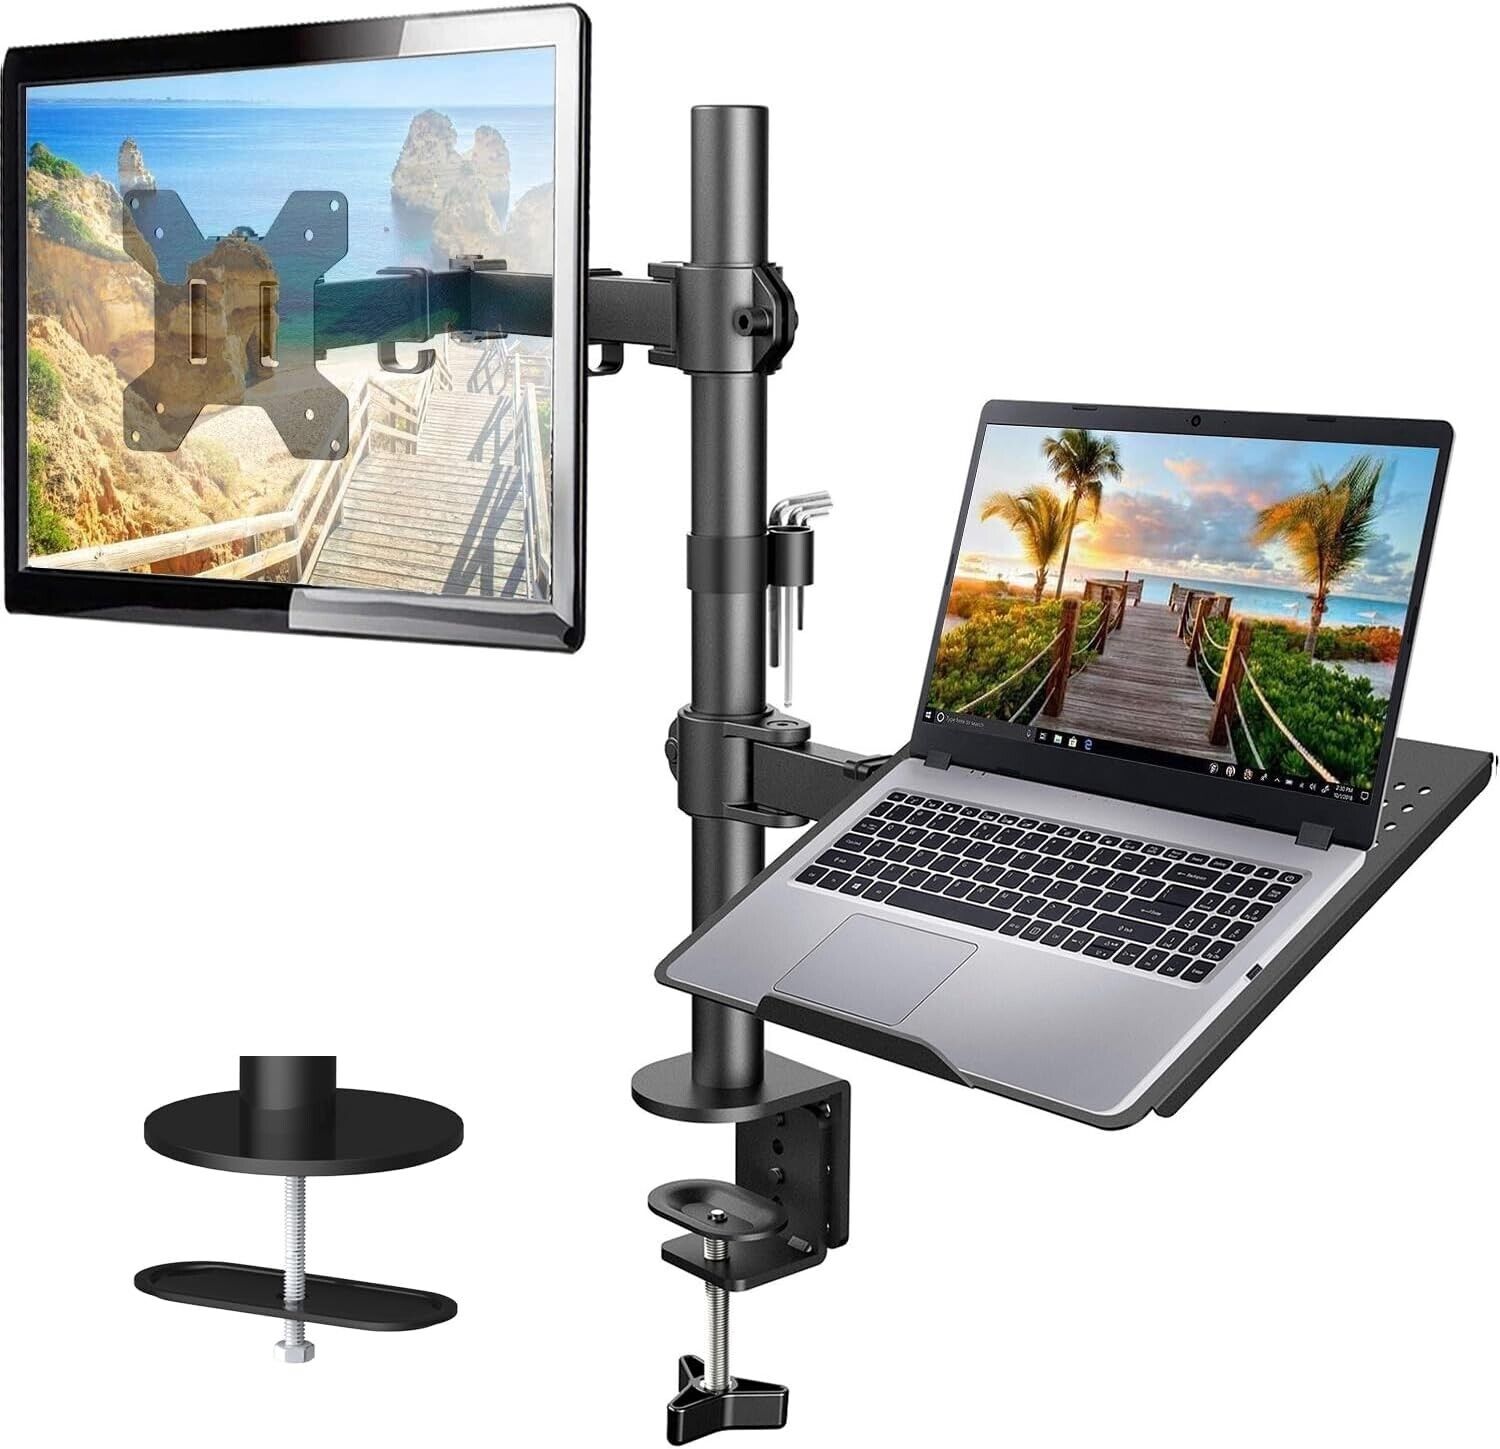 HUANUO Laptop Monitor Mount, Single Monitor Desk Mount Holds 13-32 inch Screen